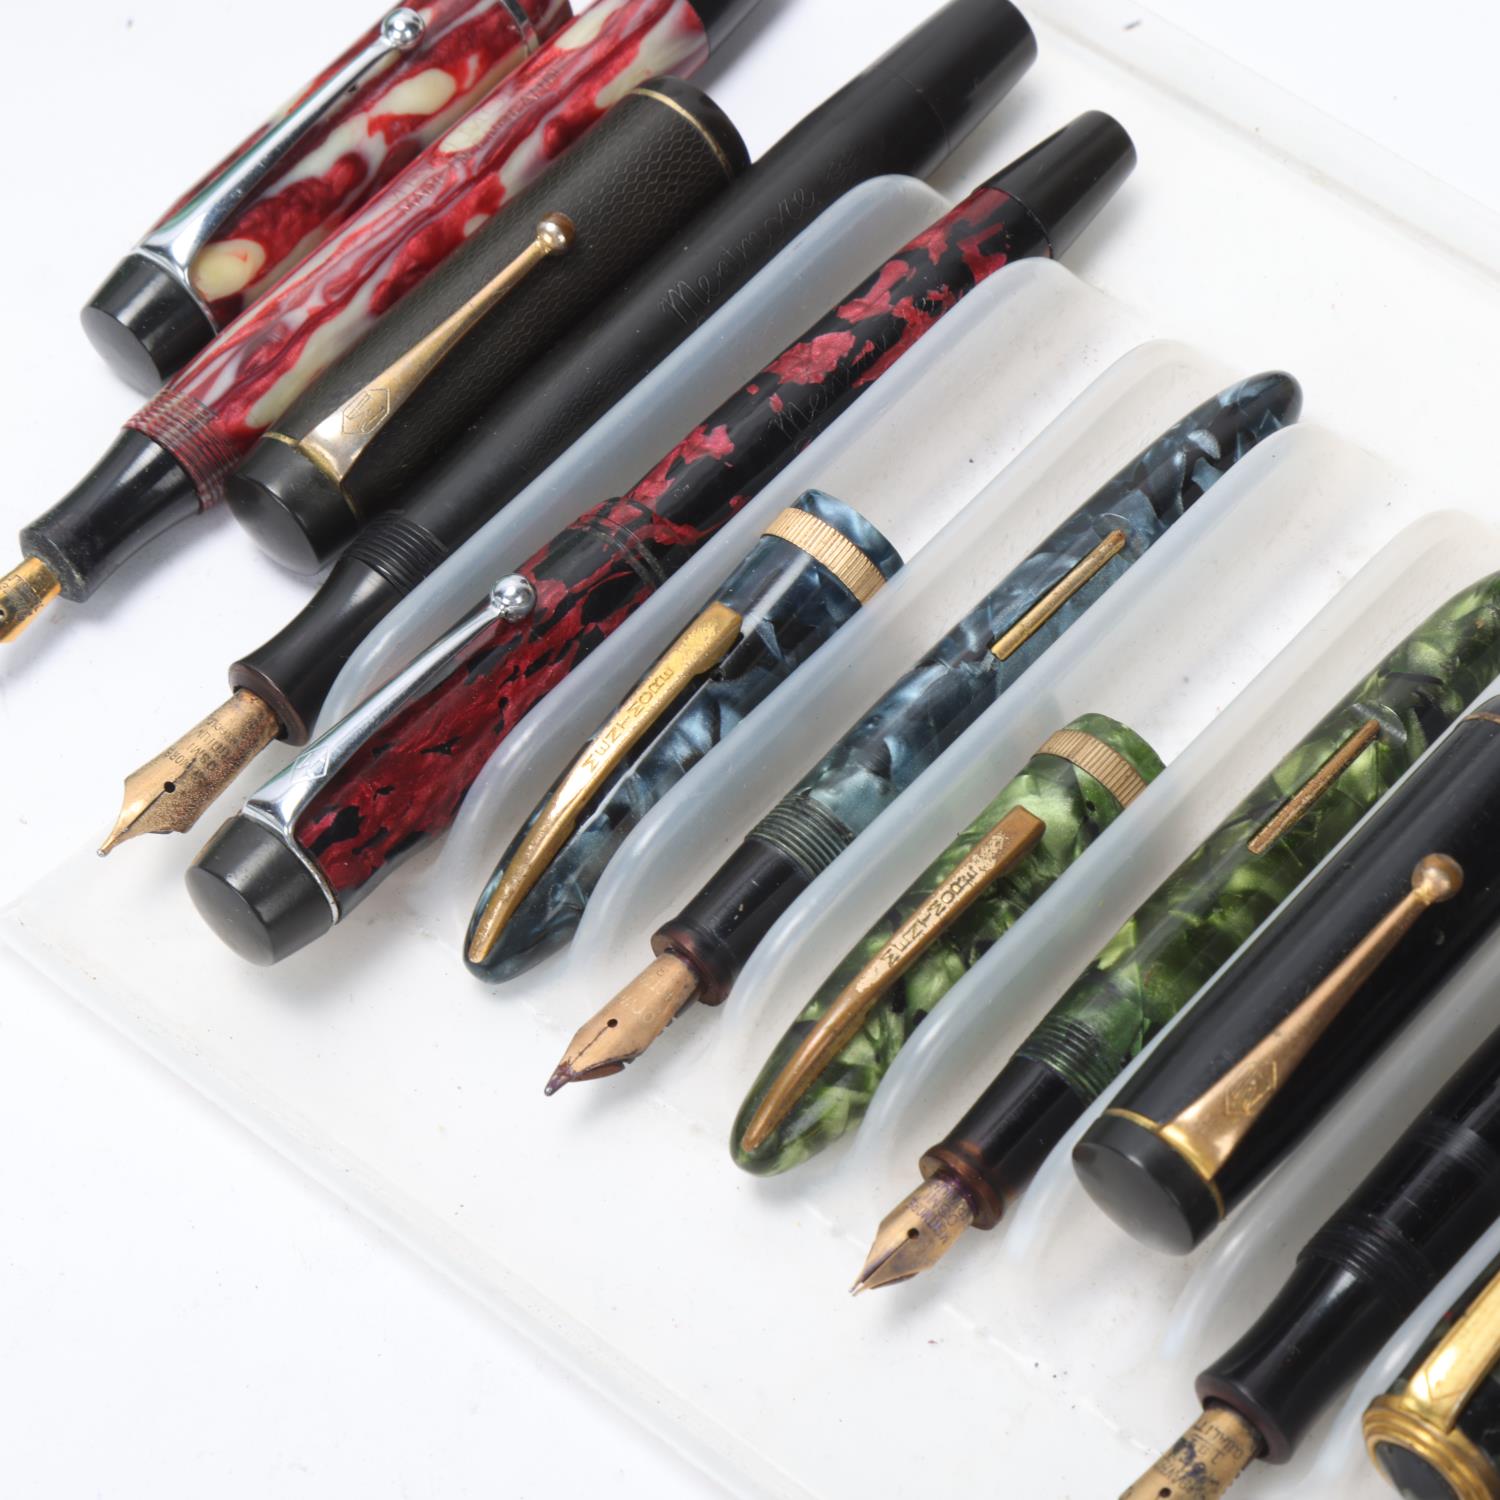 11 vintage Metmore fountain pens, includes models, Ink-Lock, Diploma, Celeste, Auto-Flow, Supreme, - Image 3 of 4